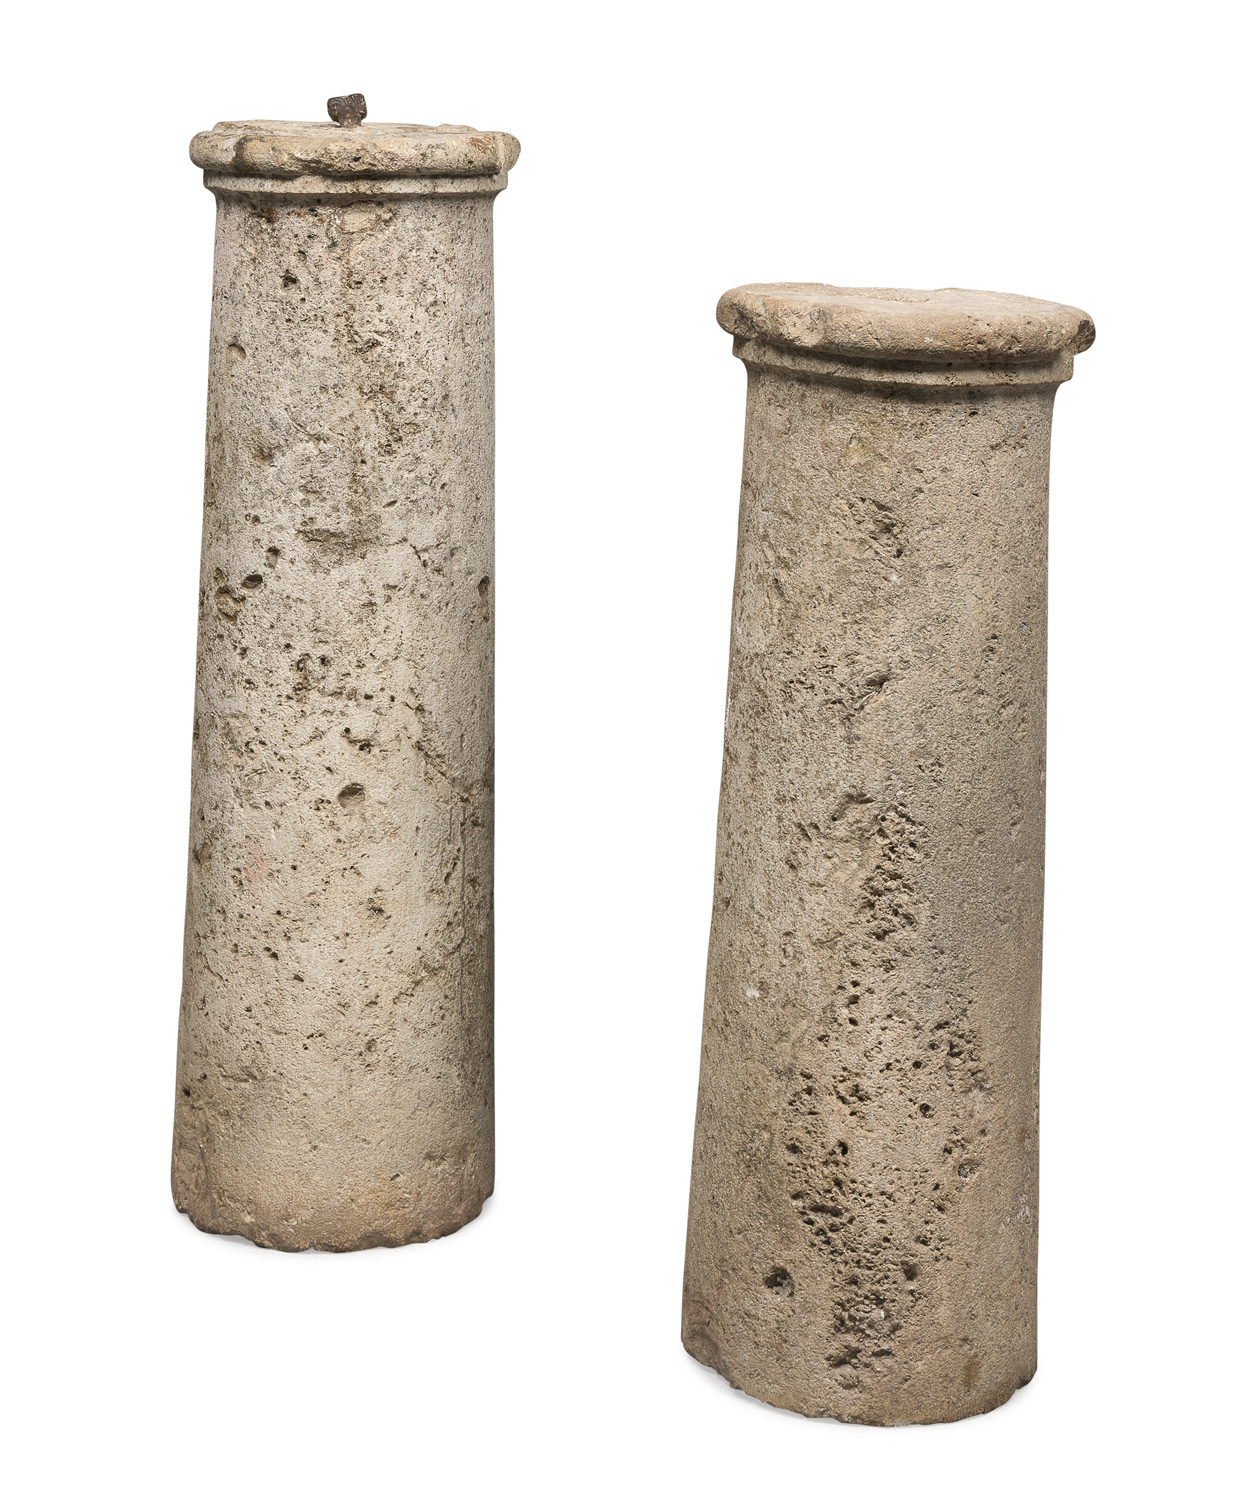 TWO TRAVERTINE COLUMNS CENTRAL ITALY 15TH CENTURY